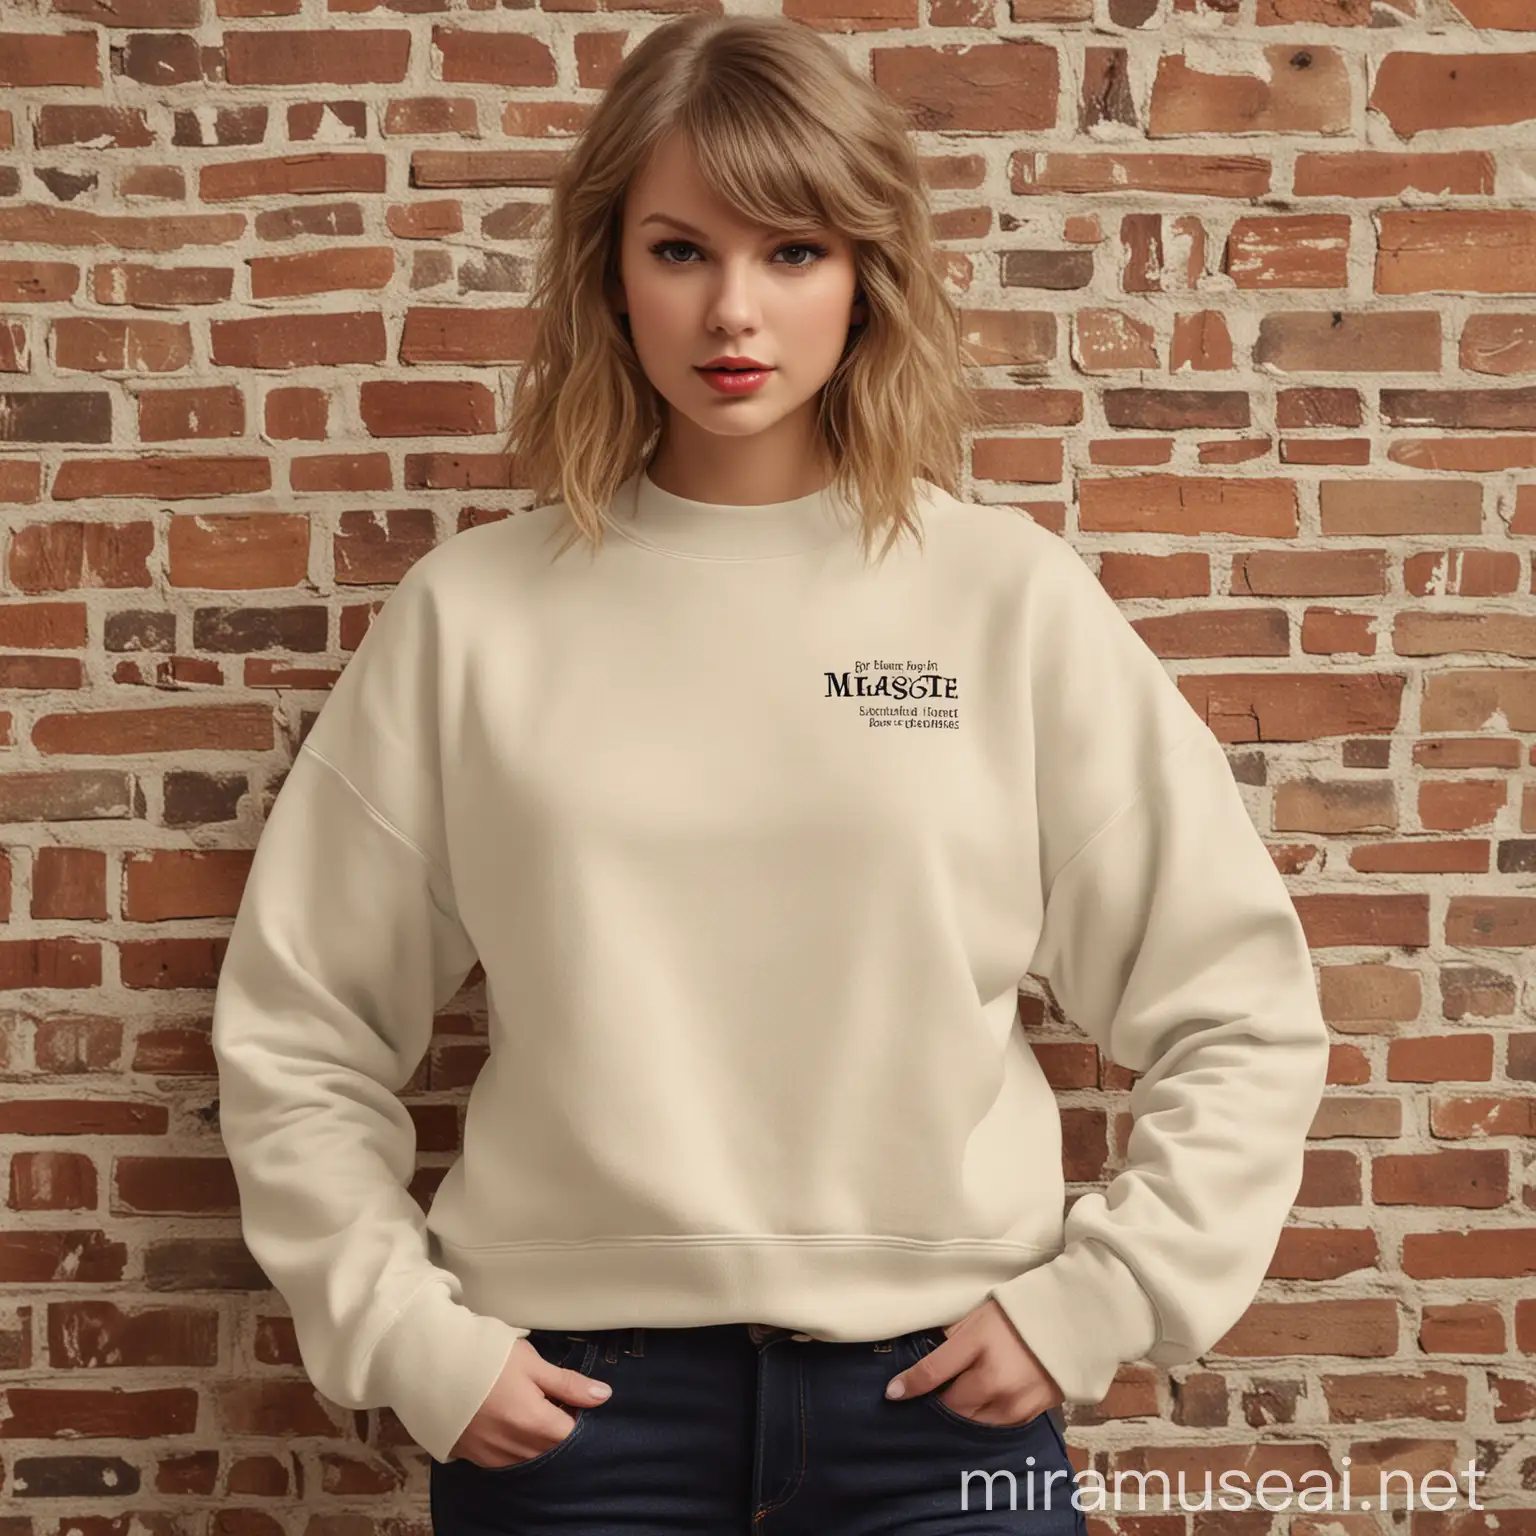 Sweatshirt Details:
Use the Gildan 18000 crewneck sweatshirt as the base garment for the mockup.
Specify the desired color and size of the sweatshirt, ensuring it matches the intended aesthetic.
Background:
Create a Taylor Swift-inspired background for the mockup. This could include elements such as vintage record covers, handwritten lyrics, concert photos, or iconic imagery from Taylor Swift's music videos.
Ensure that the background enhances the overall theme and mood of the mockup while providing a subtle nod to Taylor Swift's style and sentiment.
Typography and Artwork:
Exclude any pre-existing typography or artwork from the sweatshirt itself, as you'll be uploading your own design.
Ensure that the sweatshirt provides a clean canvas for your custom design, with no pre-existing text or imagery.
Details:
Focus on the construction and quality of the sweatshirt, highlighting features such as ribbed cuffs, neckline, and hem.
Specify any desired details that contribute to the overall aesthetic and functionality of the sweatshirt.
Fit and Style:
Ensure the mockup accurately represents the fit and style of the Gildan 18000 crewneck sweatshirt, providing a relaxed yet stylish silhouette.
Emphasize the versatility and comfort of the sweatshirt, making it suitable for various occasions and settings.
Presentation:
Set the mockup in a lifestyle setting that reflects Taylor Swift's aesthetic, such as a cozy coffee shop, vintage record store, or sunlit park.
Describe the ambiance and mood of the setting to evoke nostalgia and romance, complementing the Taylor Swift-inspired background.